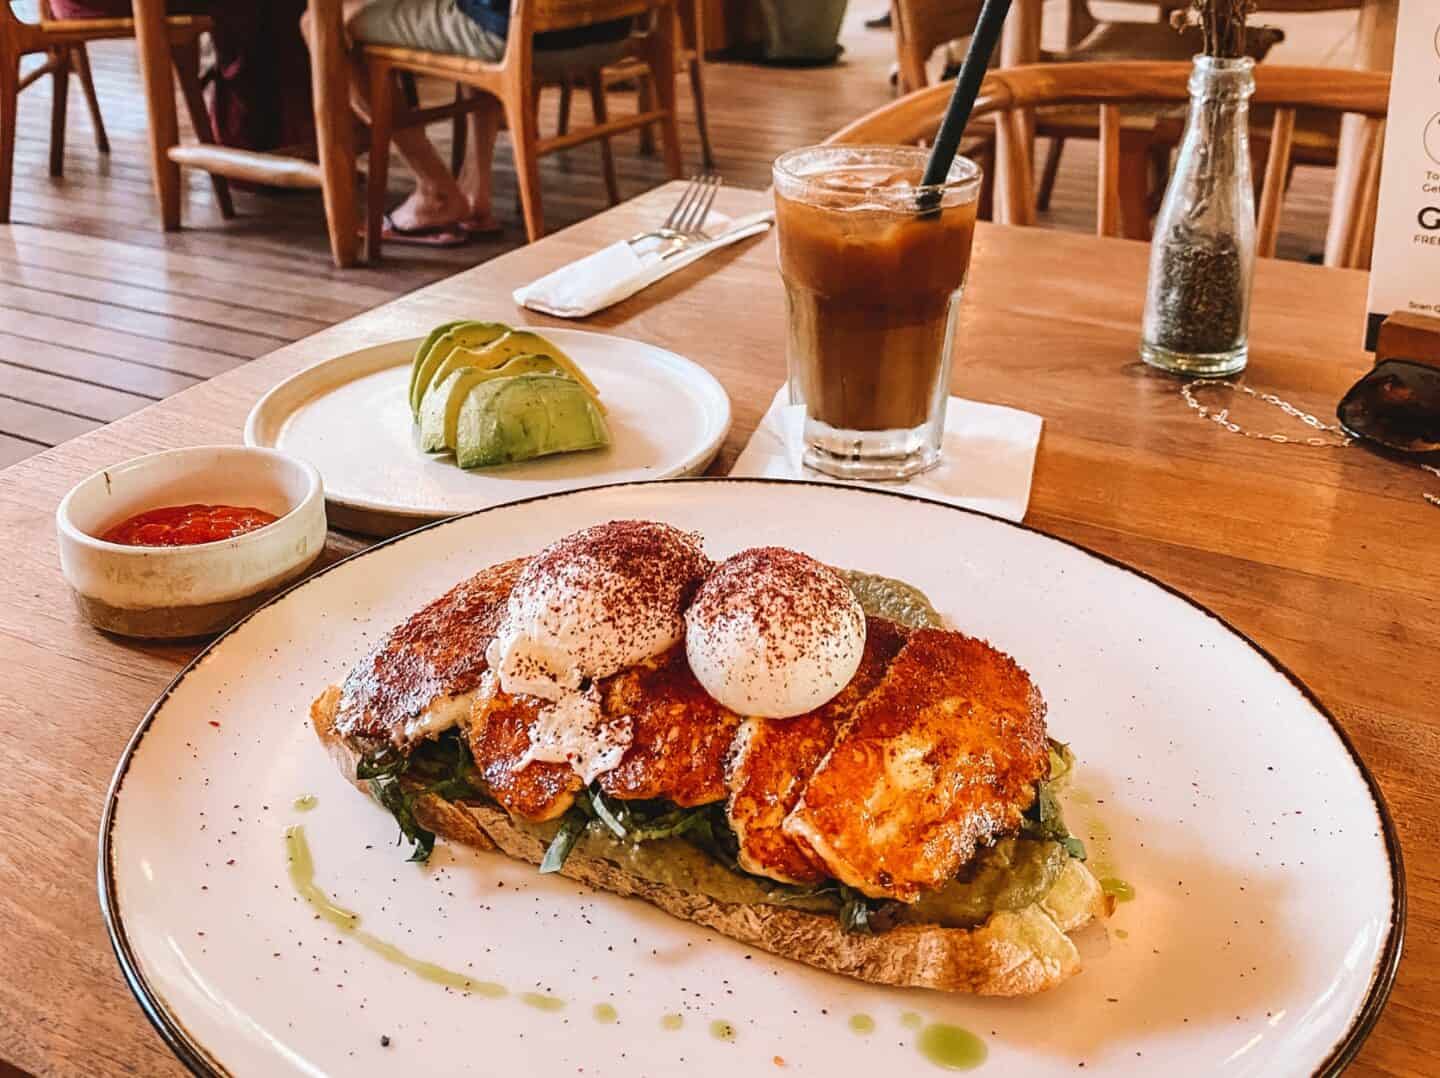 A delicious breakfast in Canggu consisting of grilled halloumi toast from Zin Cafe